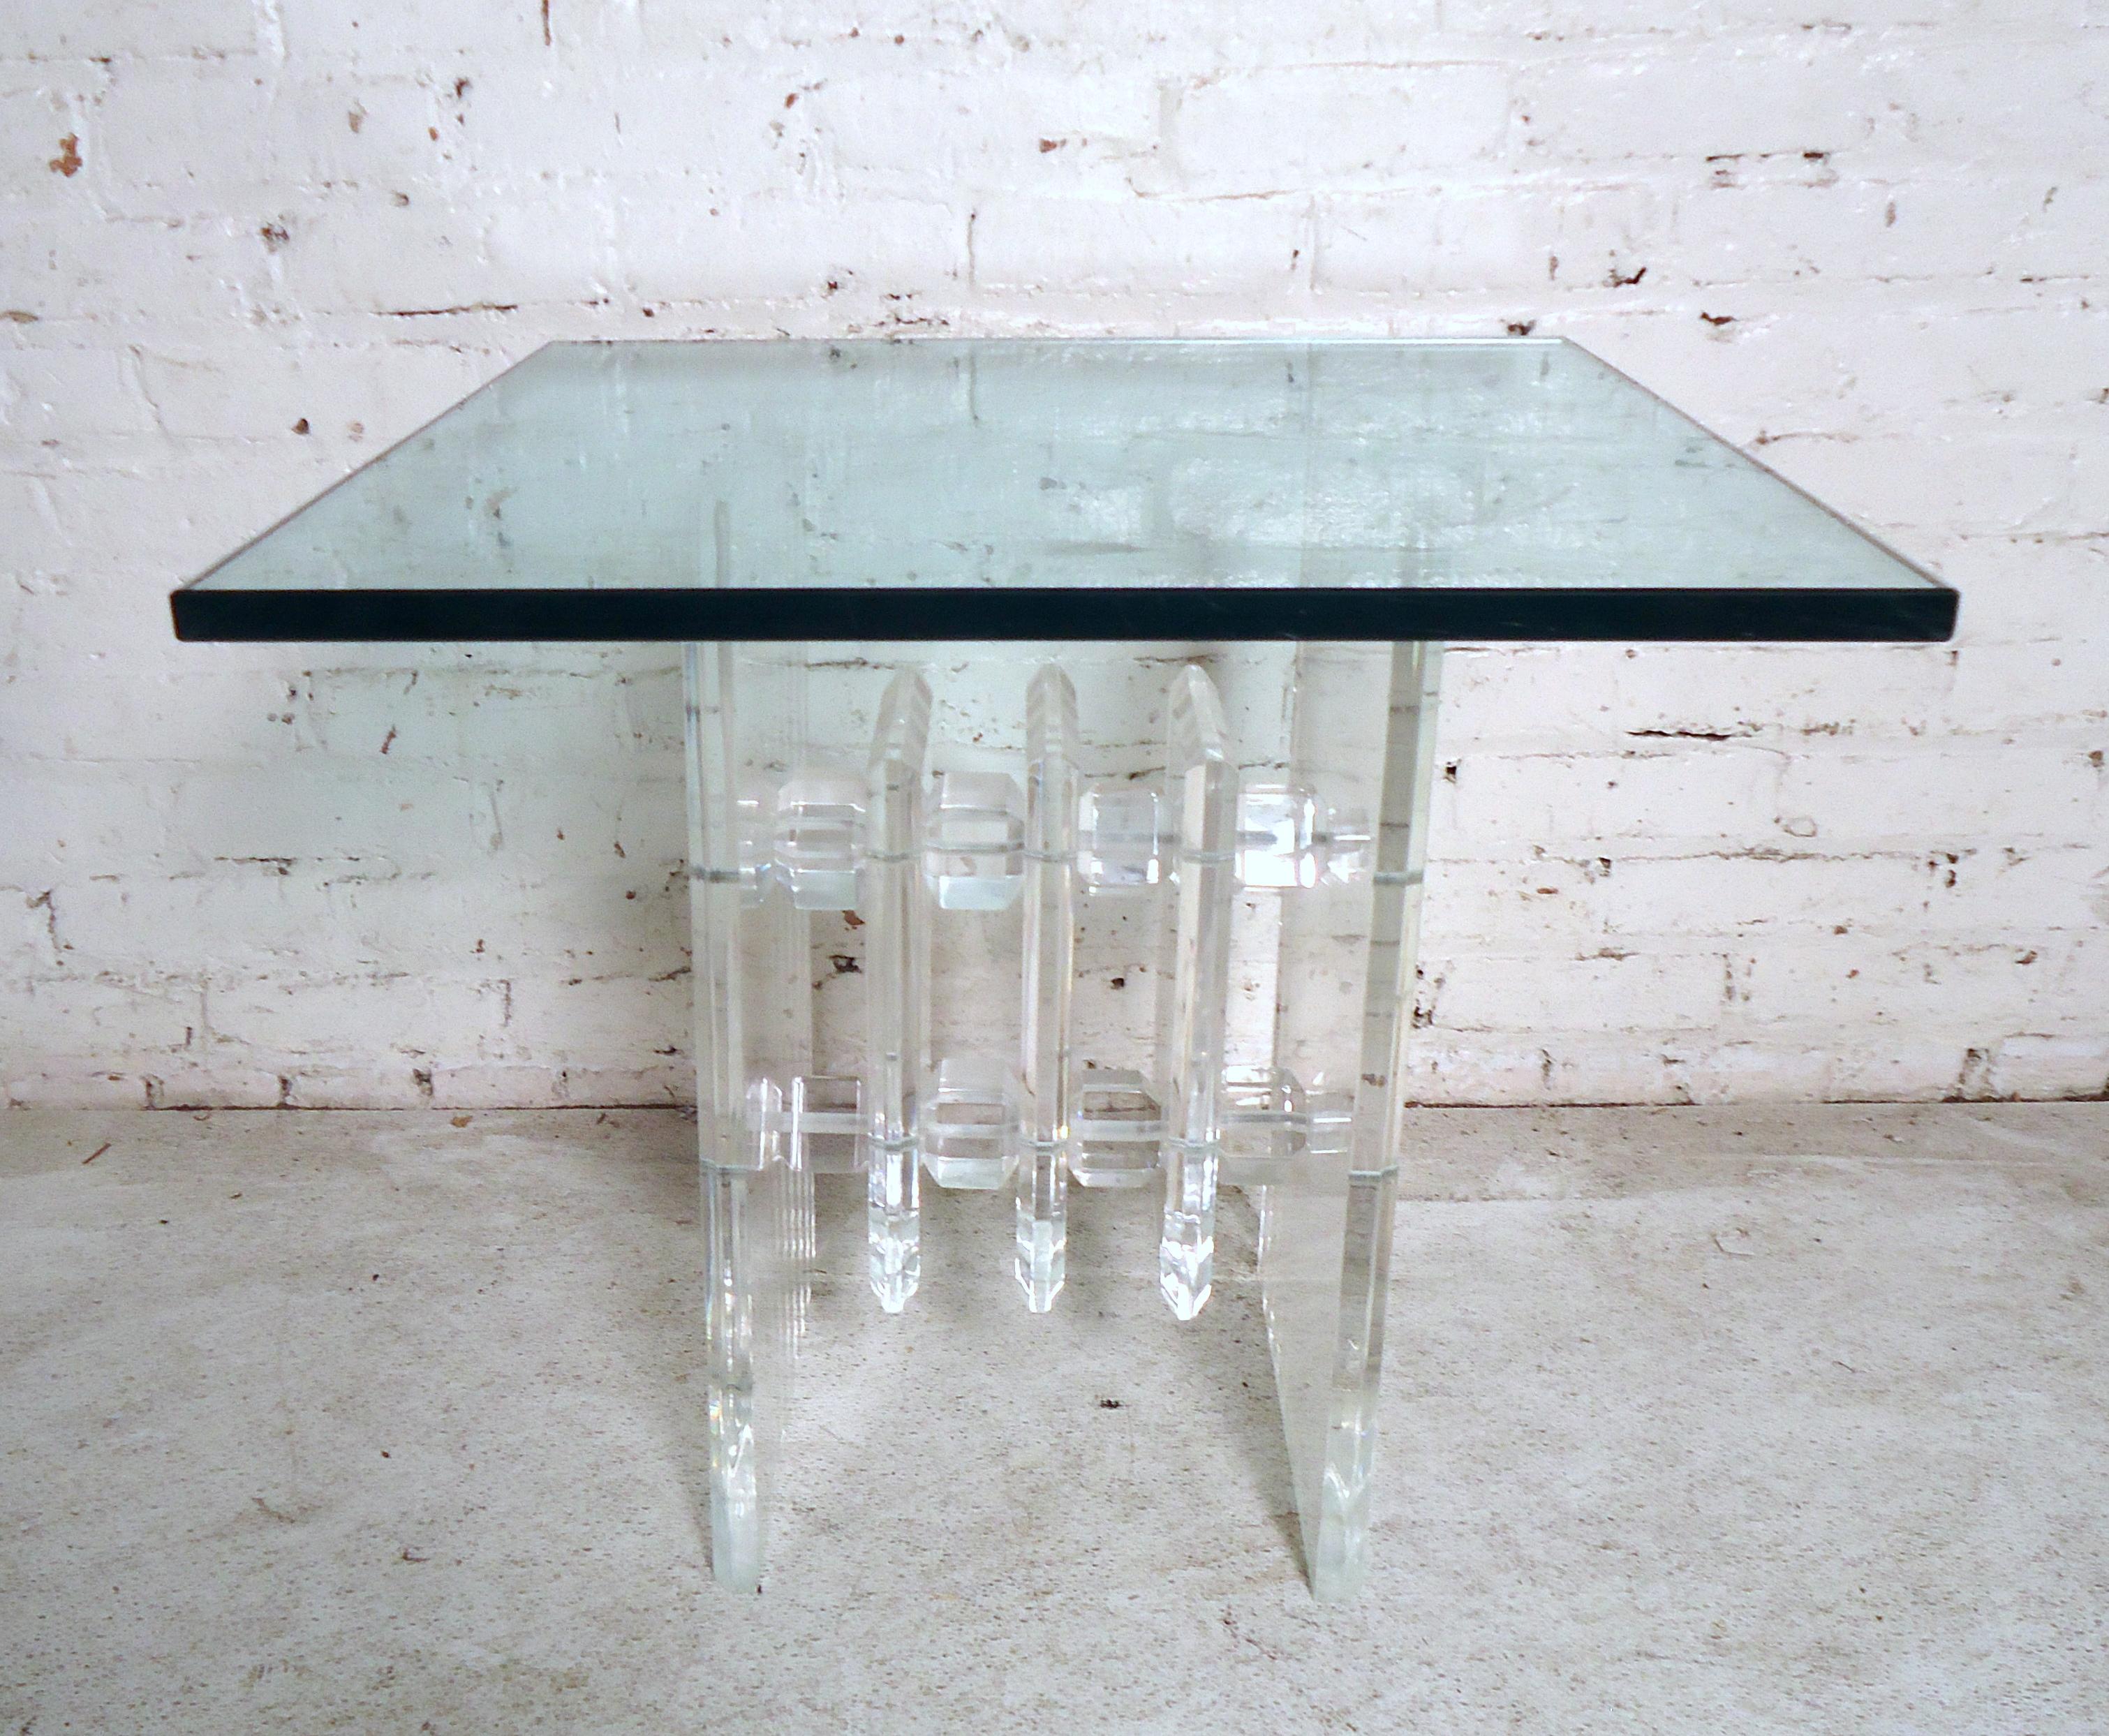 This sleek modern side table features an acrylic base and square glass top.

Please confirm item location with dealer (NJ or NY).